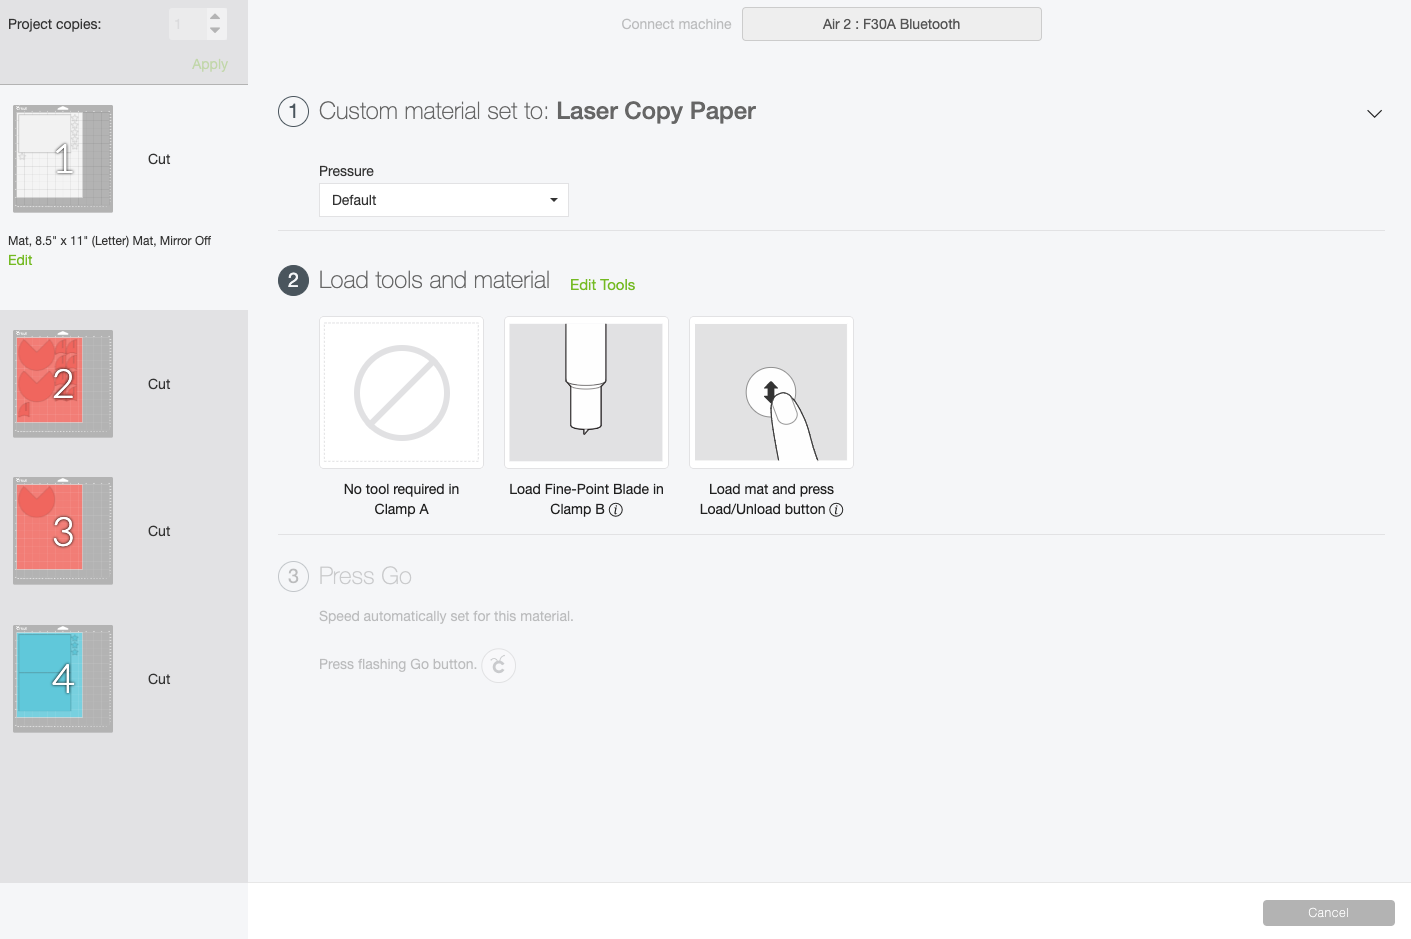 Graphical user interface of Cricut Design \"Make It\" page showing the material Laser Copy Paper selected and the tools needed